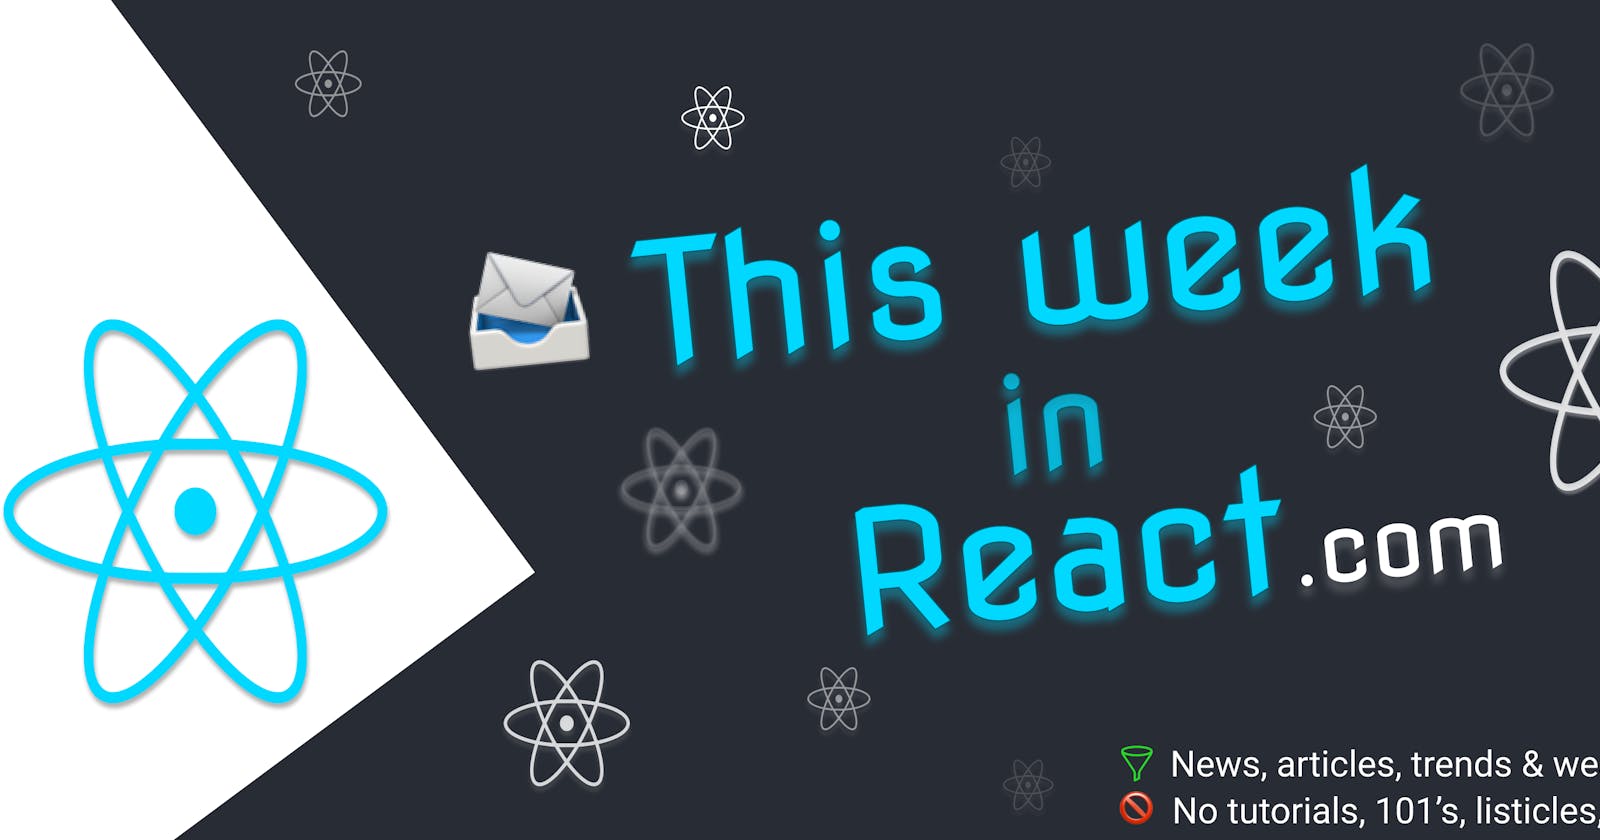 This Week In React #130: Next.js, callback ref, Zod, Redux, React-Hook-Form, Redux, mdxjs-rs, Tamagui, Skia, Shopify, Solid...